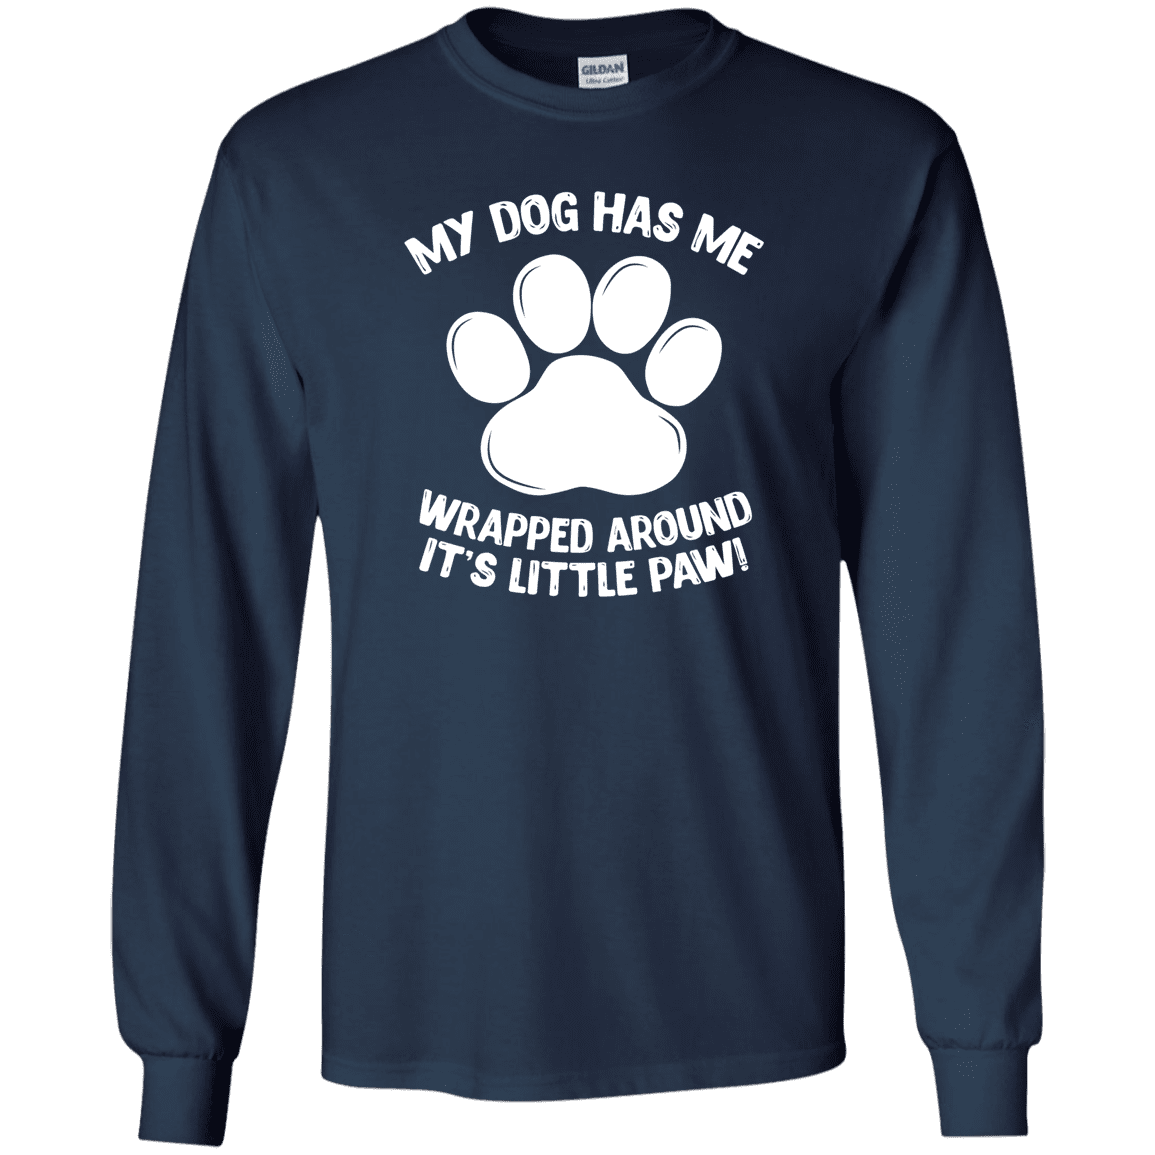 My Dog Has Me Wrapped Around It's Little Paw - Long Sleeve T Shirt.